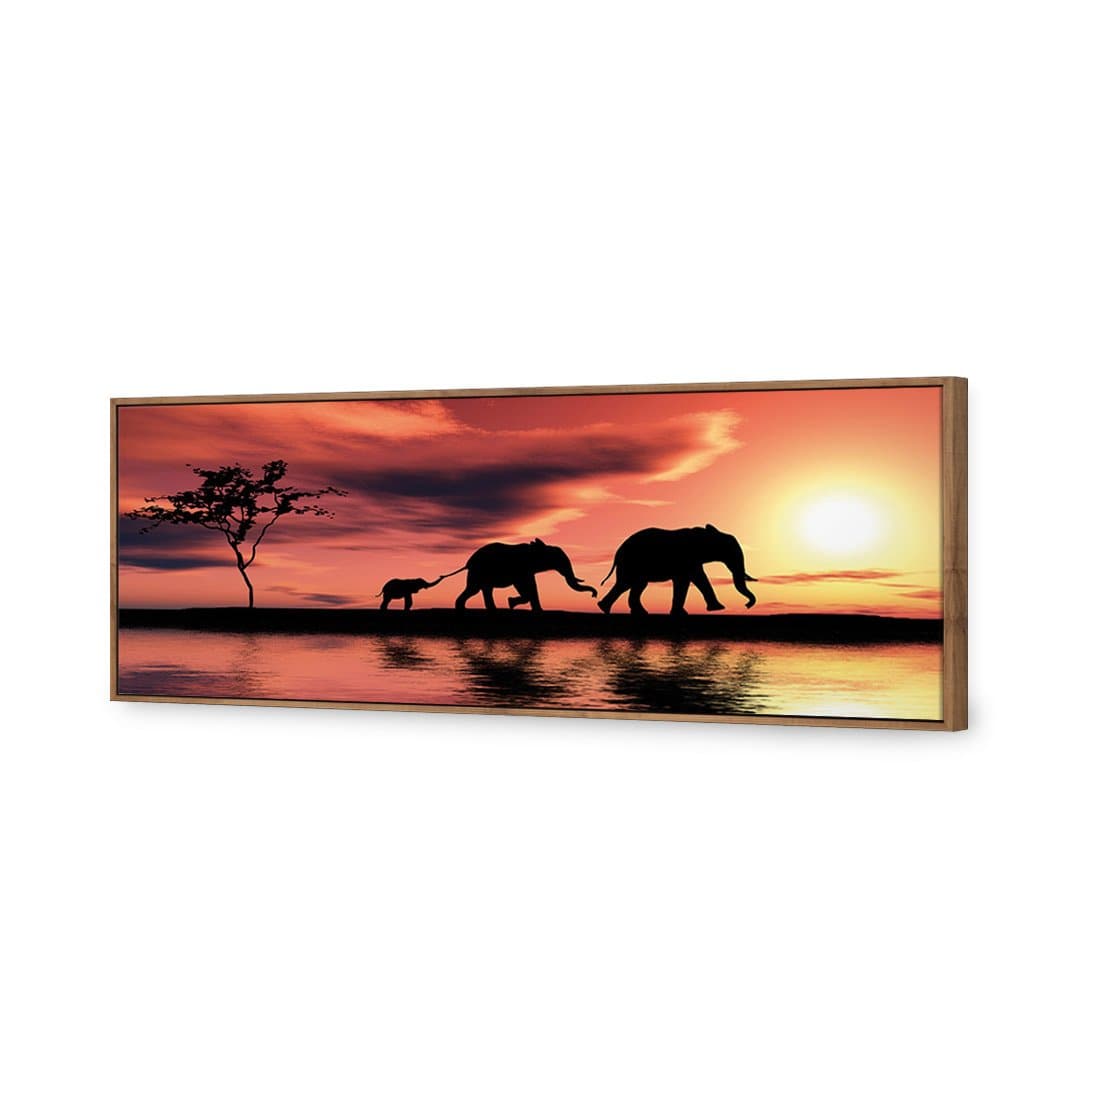 Family of Elephants at Sunset Canvas Art-Canvas-Wall Art Designs-60x20cm-Canvas - Natural Frame-Wall Art Designs